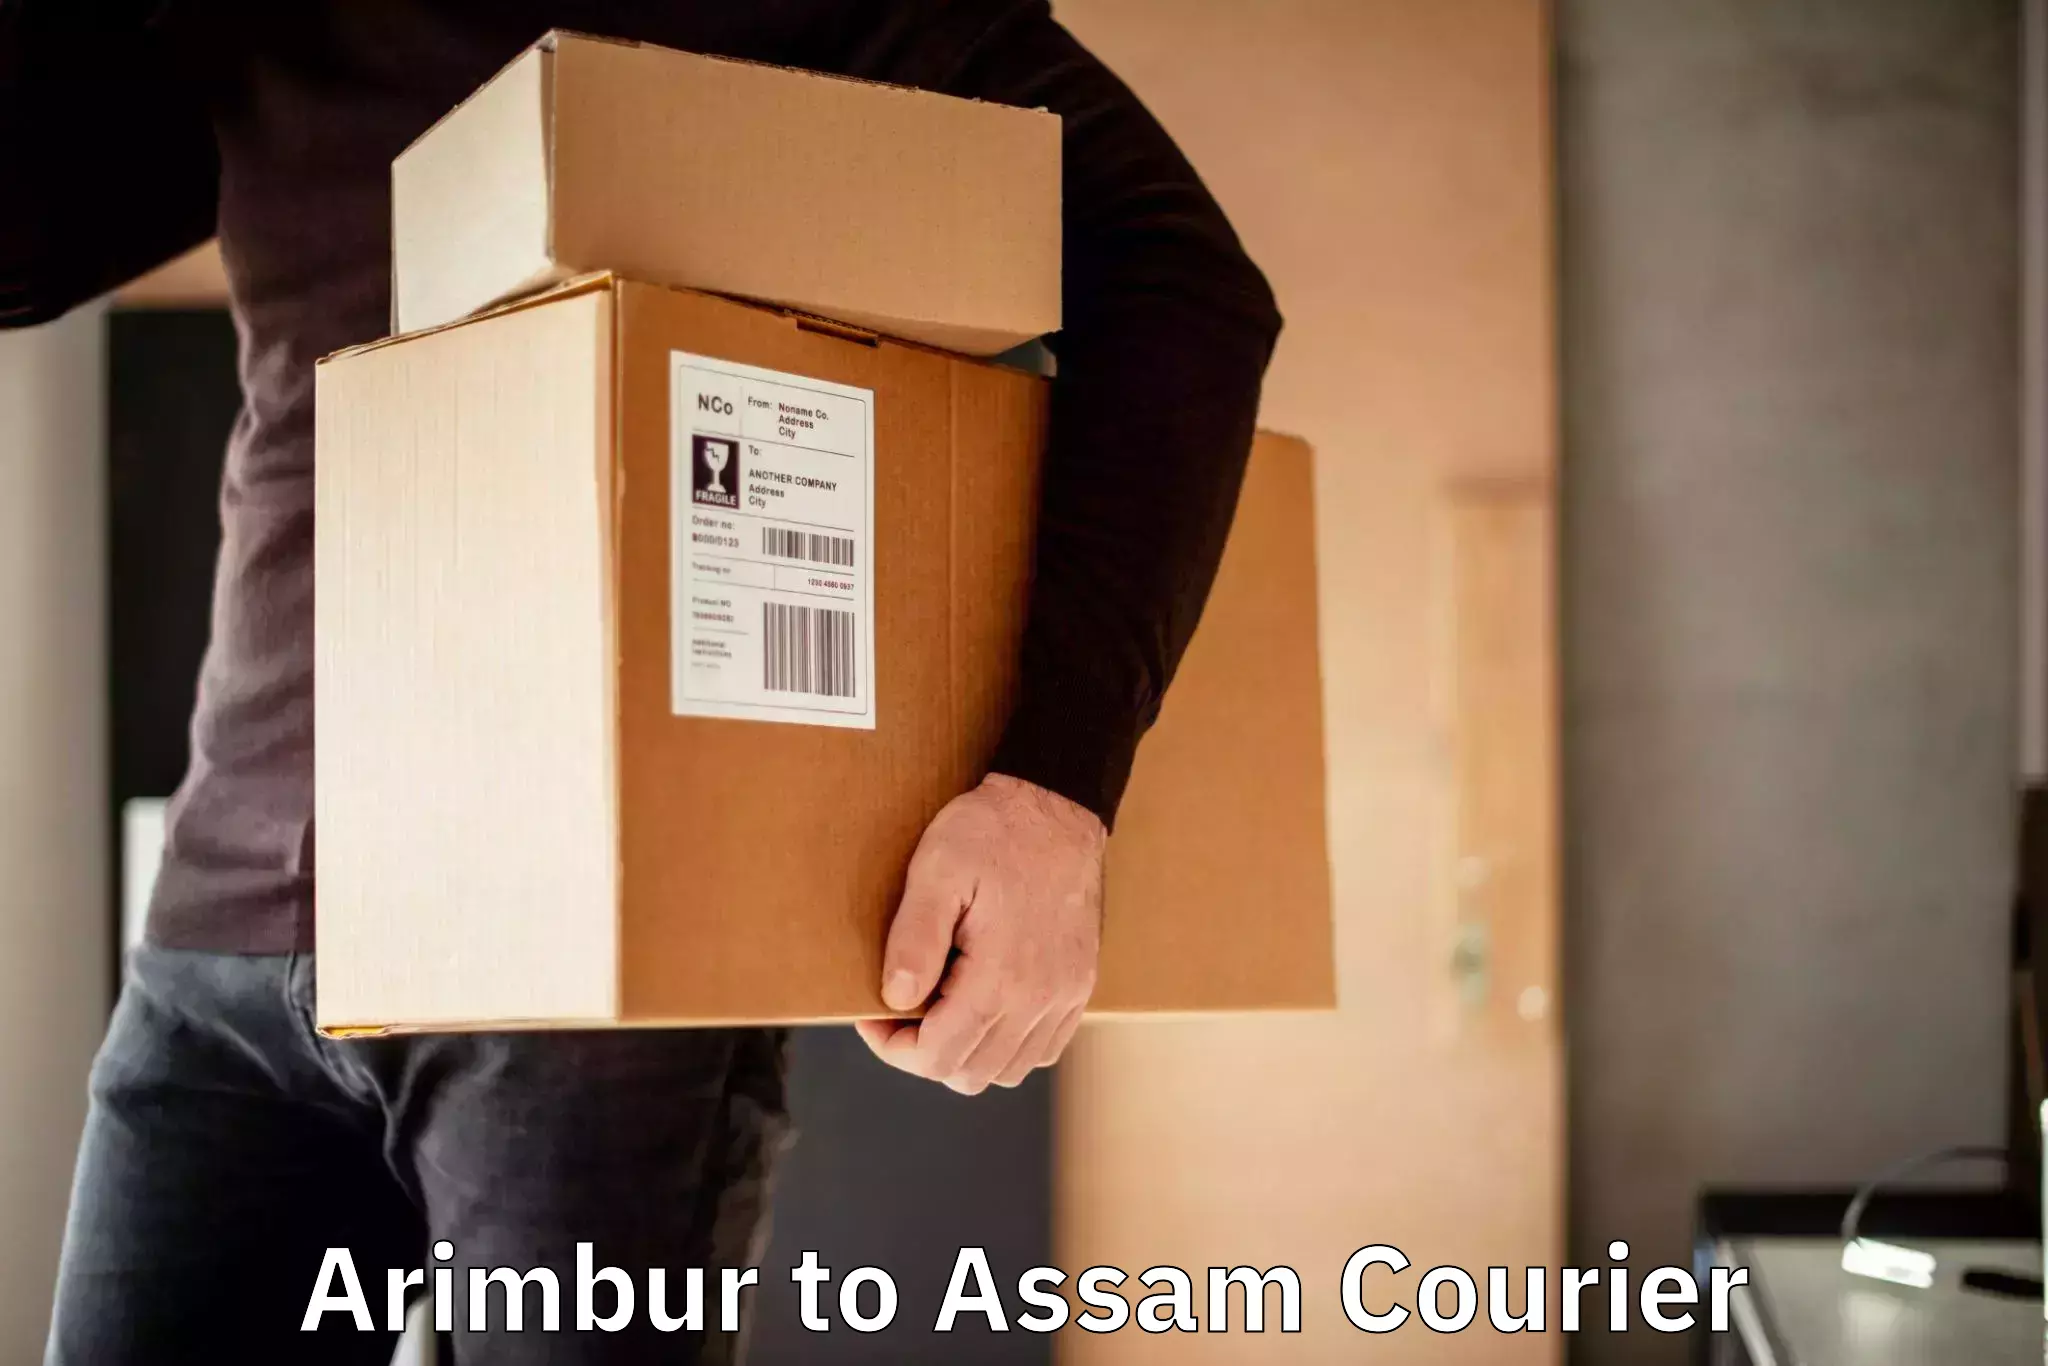 Reliable delivery network Arimbur to Assam